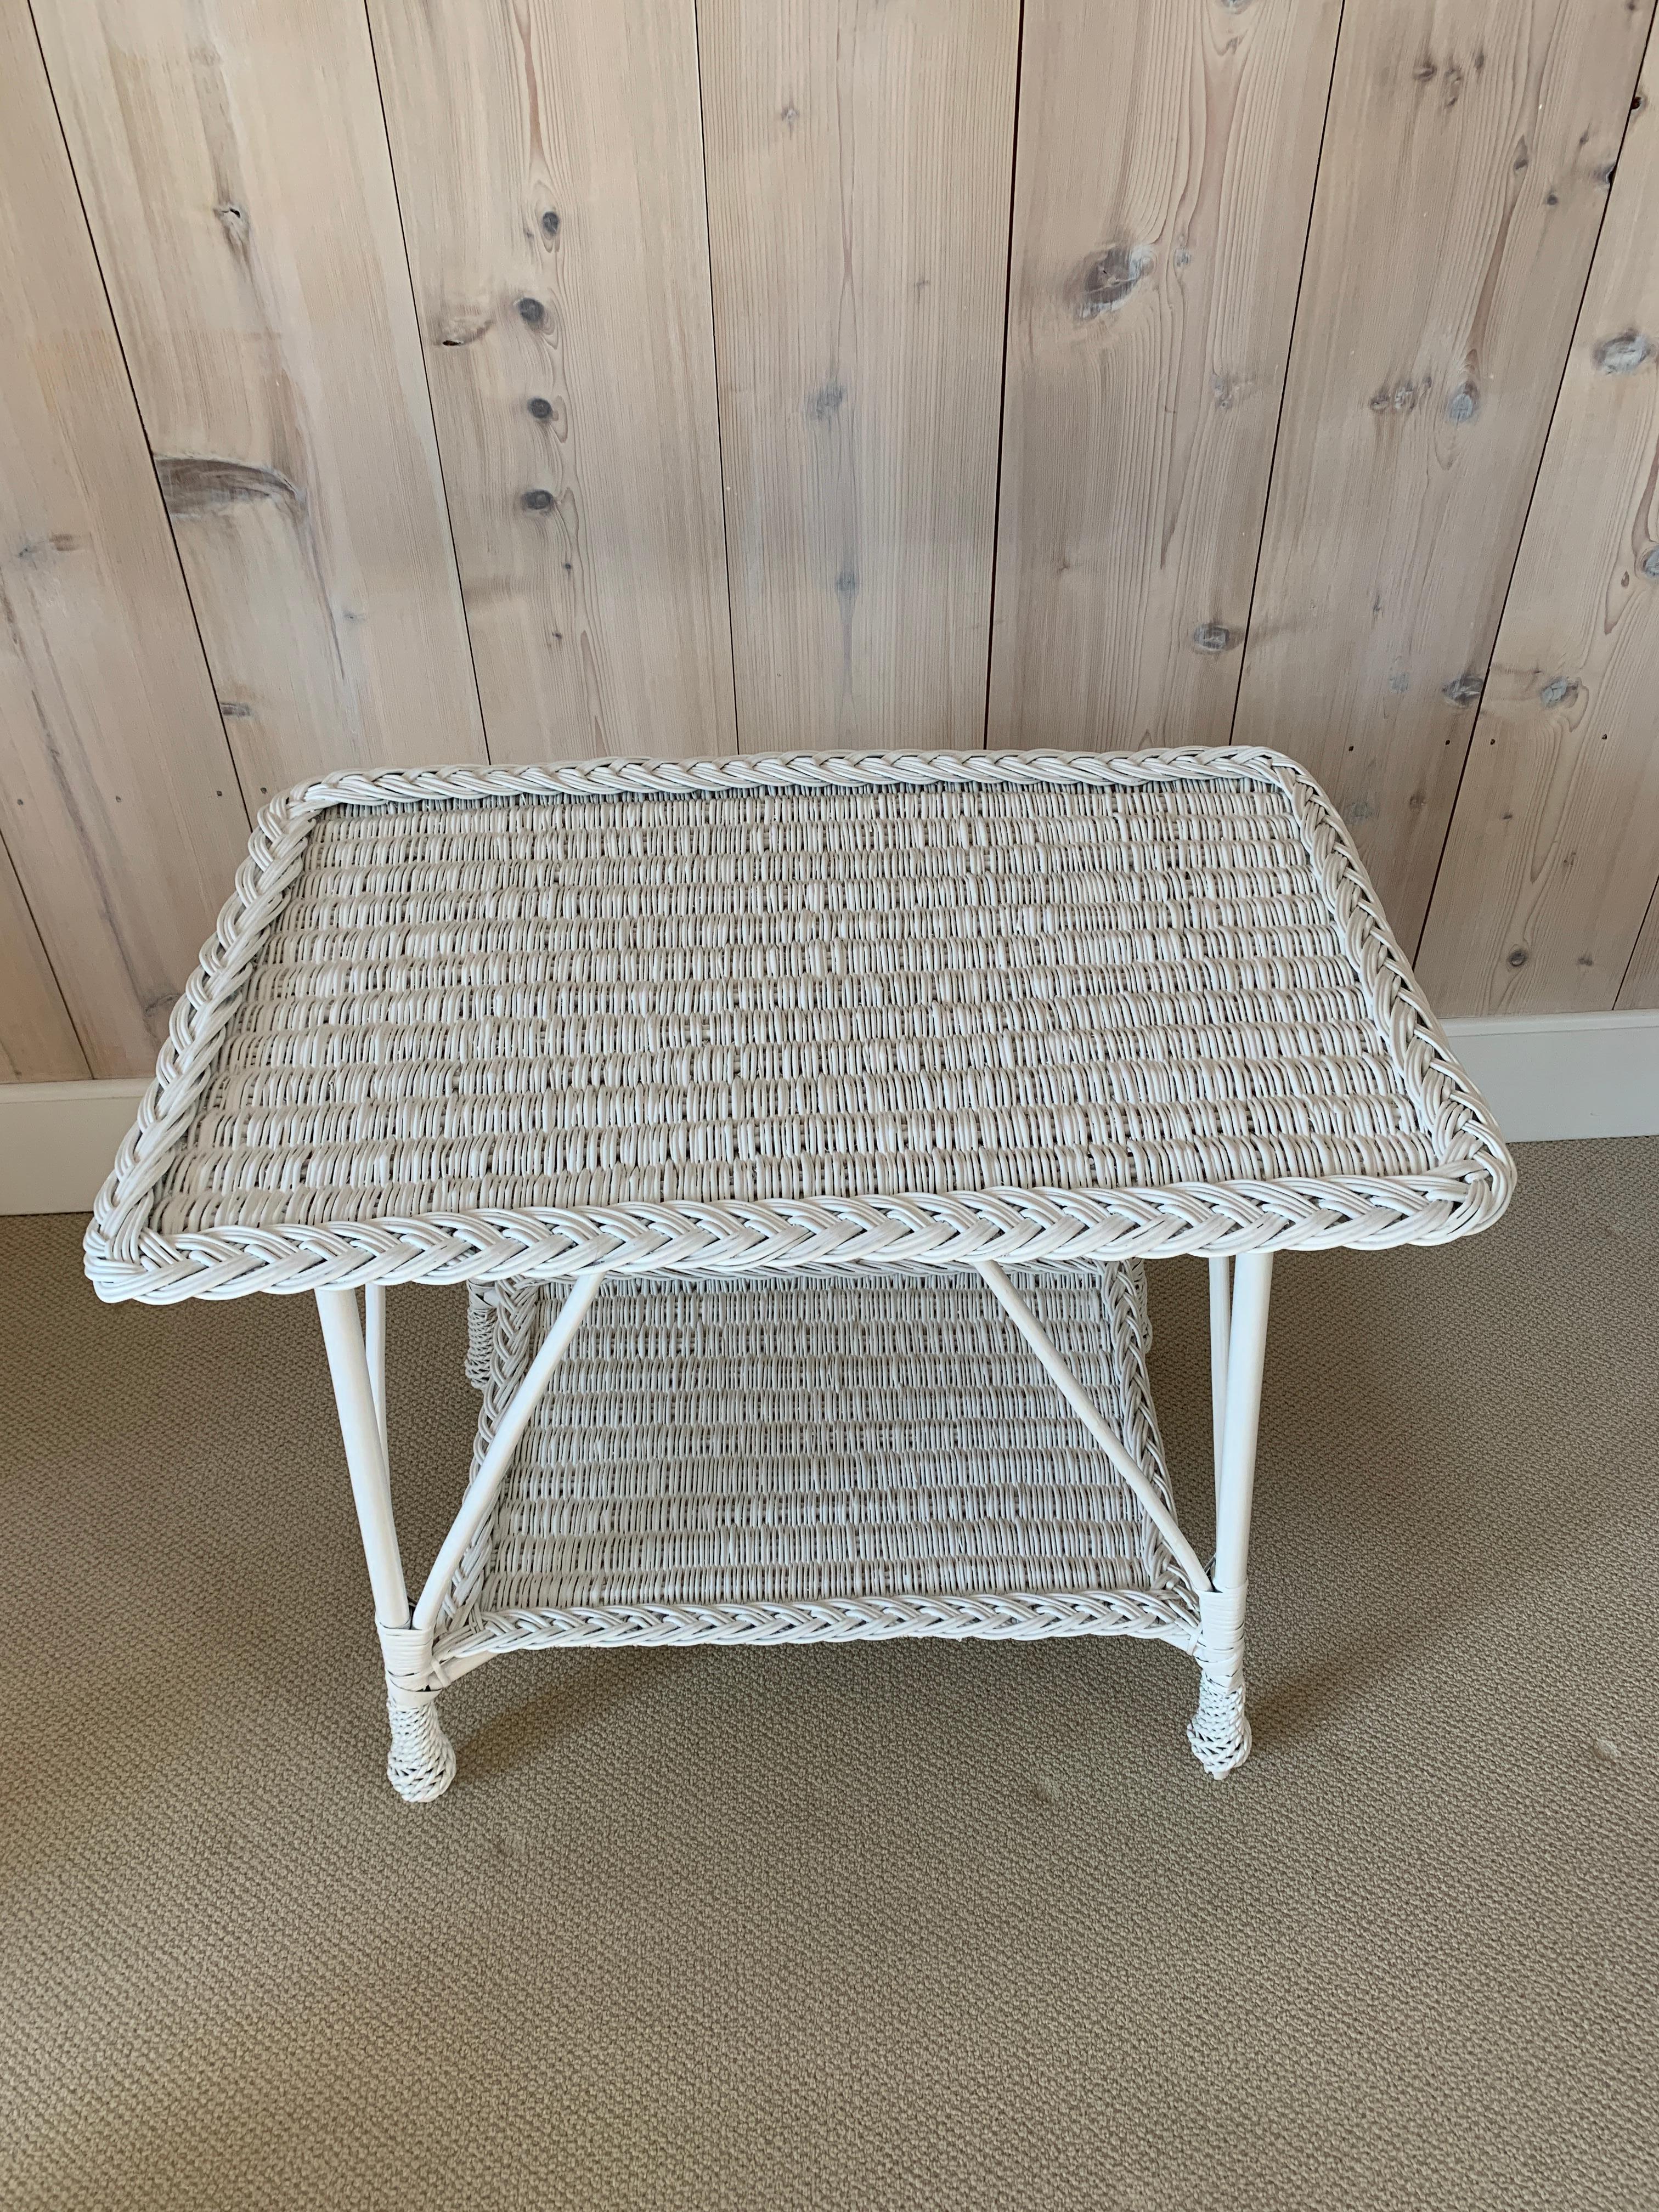 Antique Willow table in white paint. Woven top and lower shelf. and pineapple feet. Table measures 37